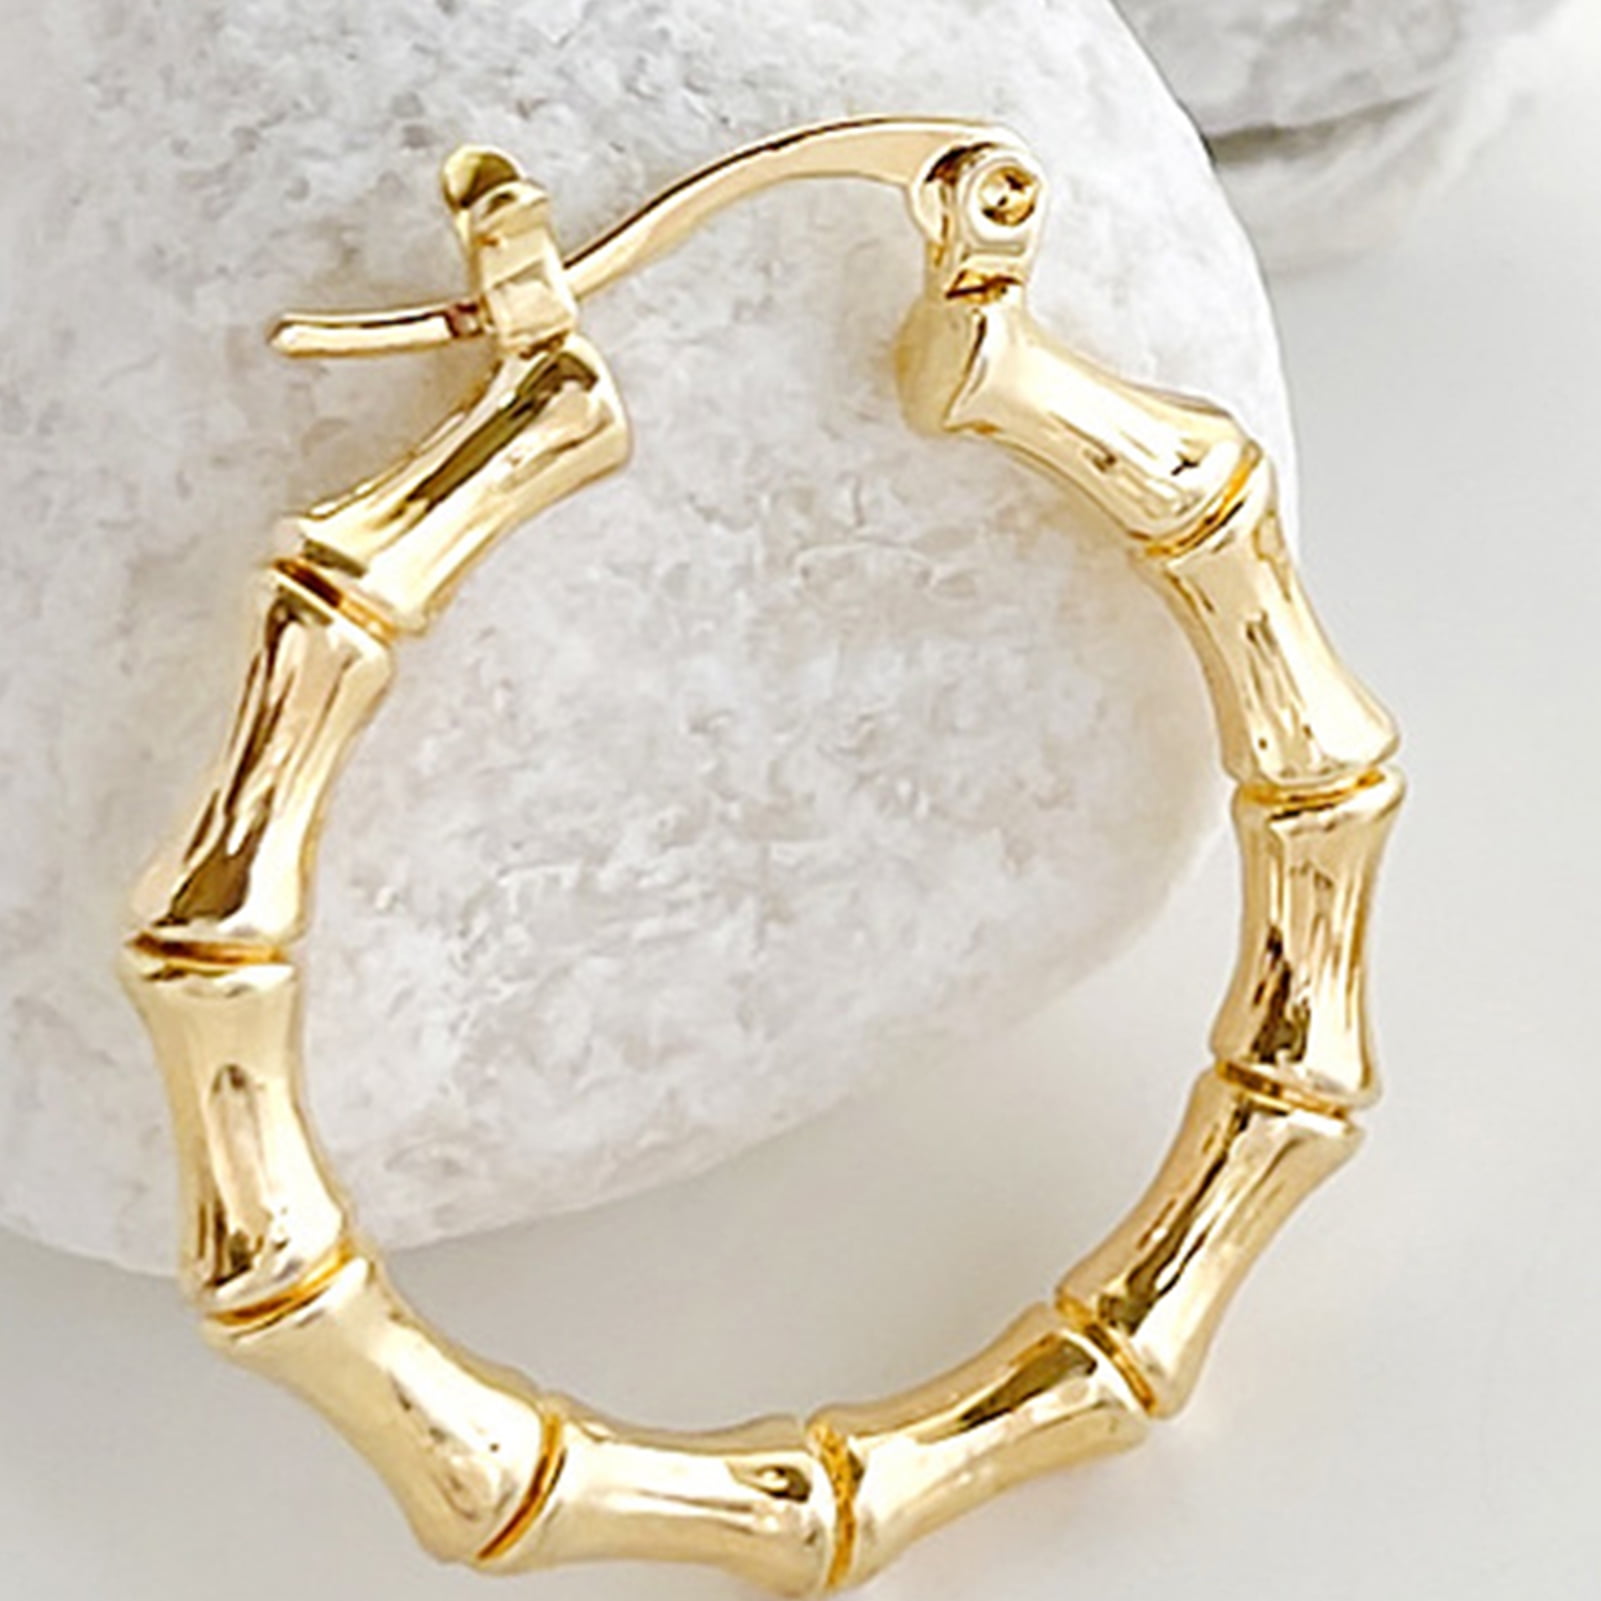 6 Pairs Large Bamboo Shaped Hoop Earrings Set Gold Tone Statement Hip-Hop Earrings for Women Girls Jewelry 